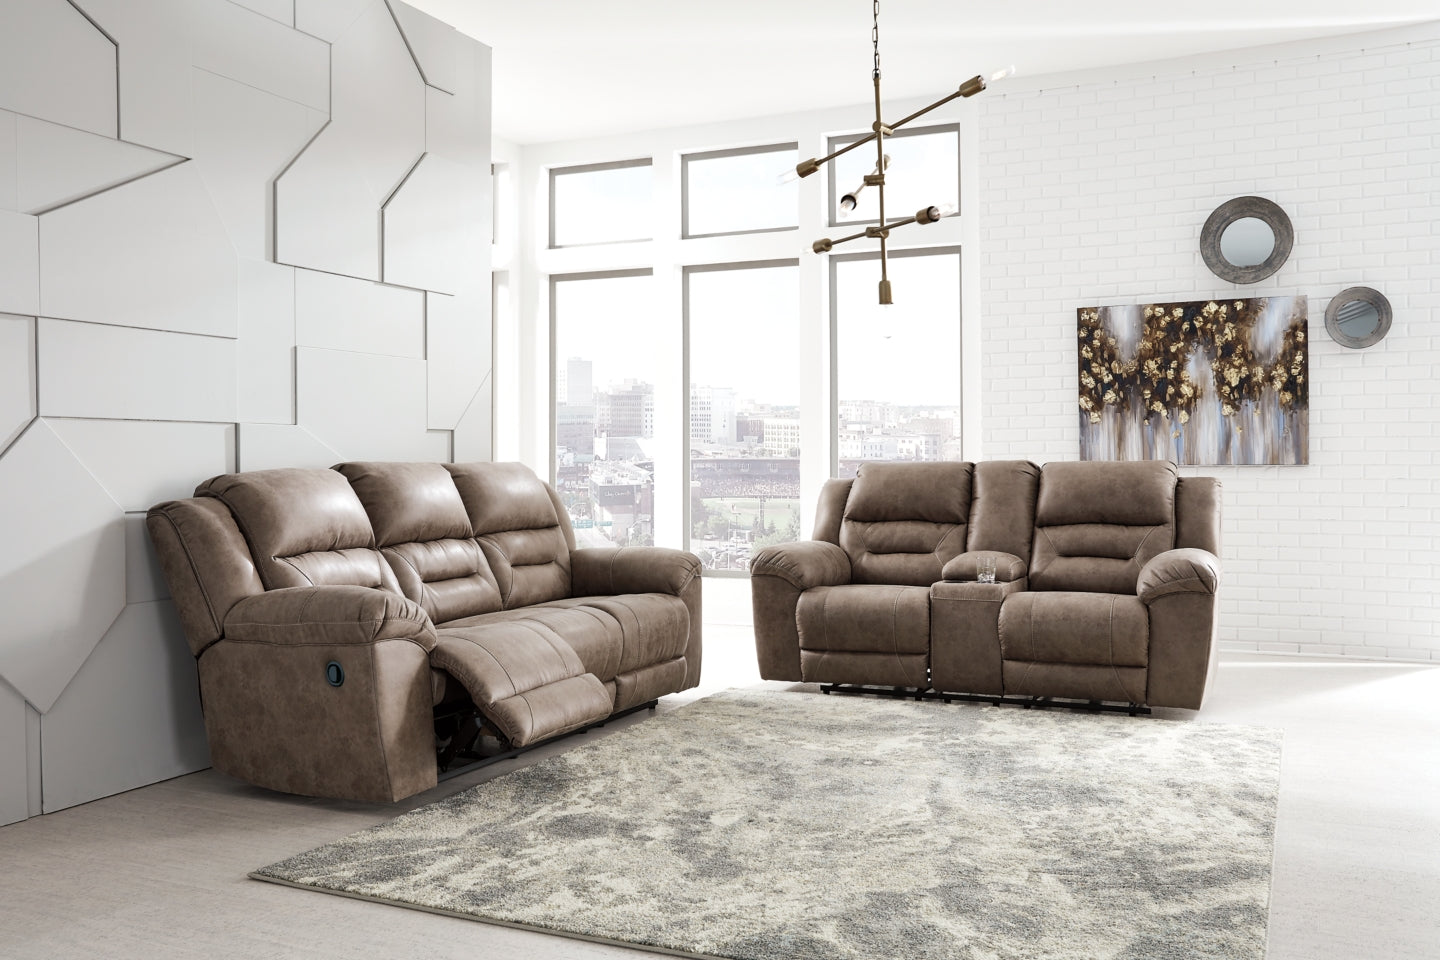 Stoneland Reclining Sofa and Loveseat - furniture place usa